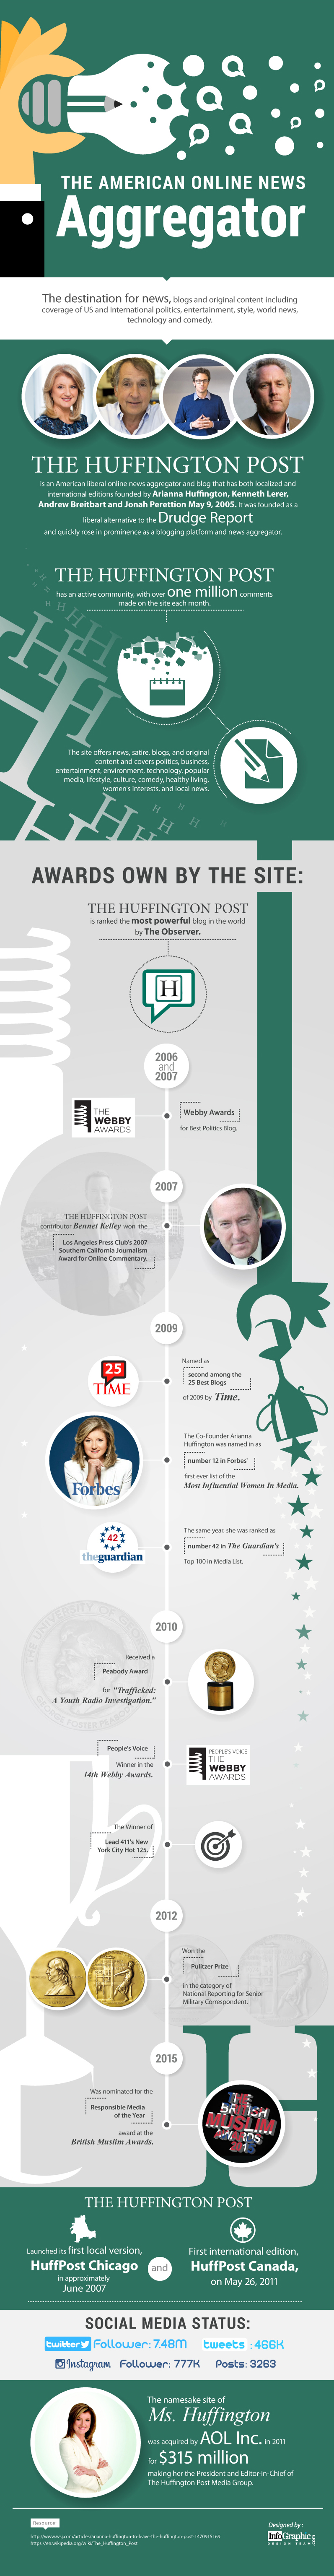 The History of The Huffington Post [Infographic]